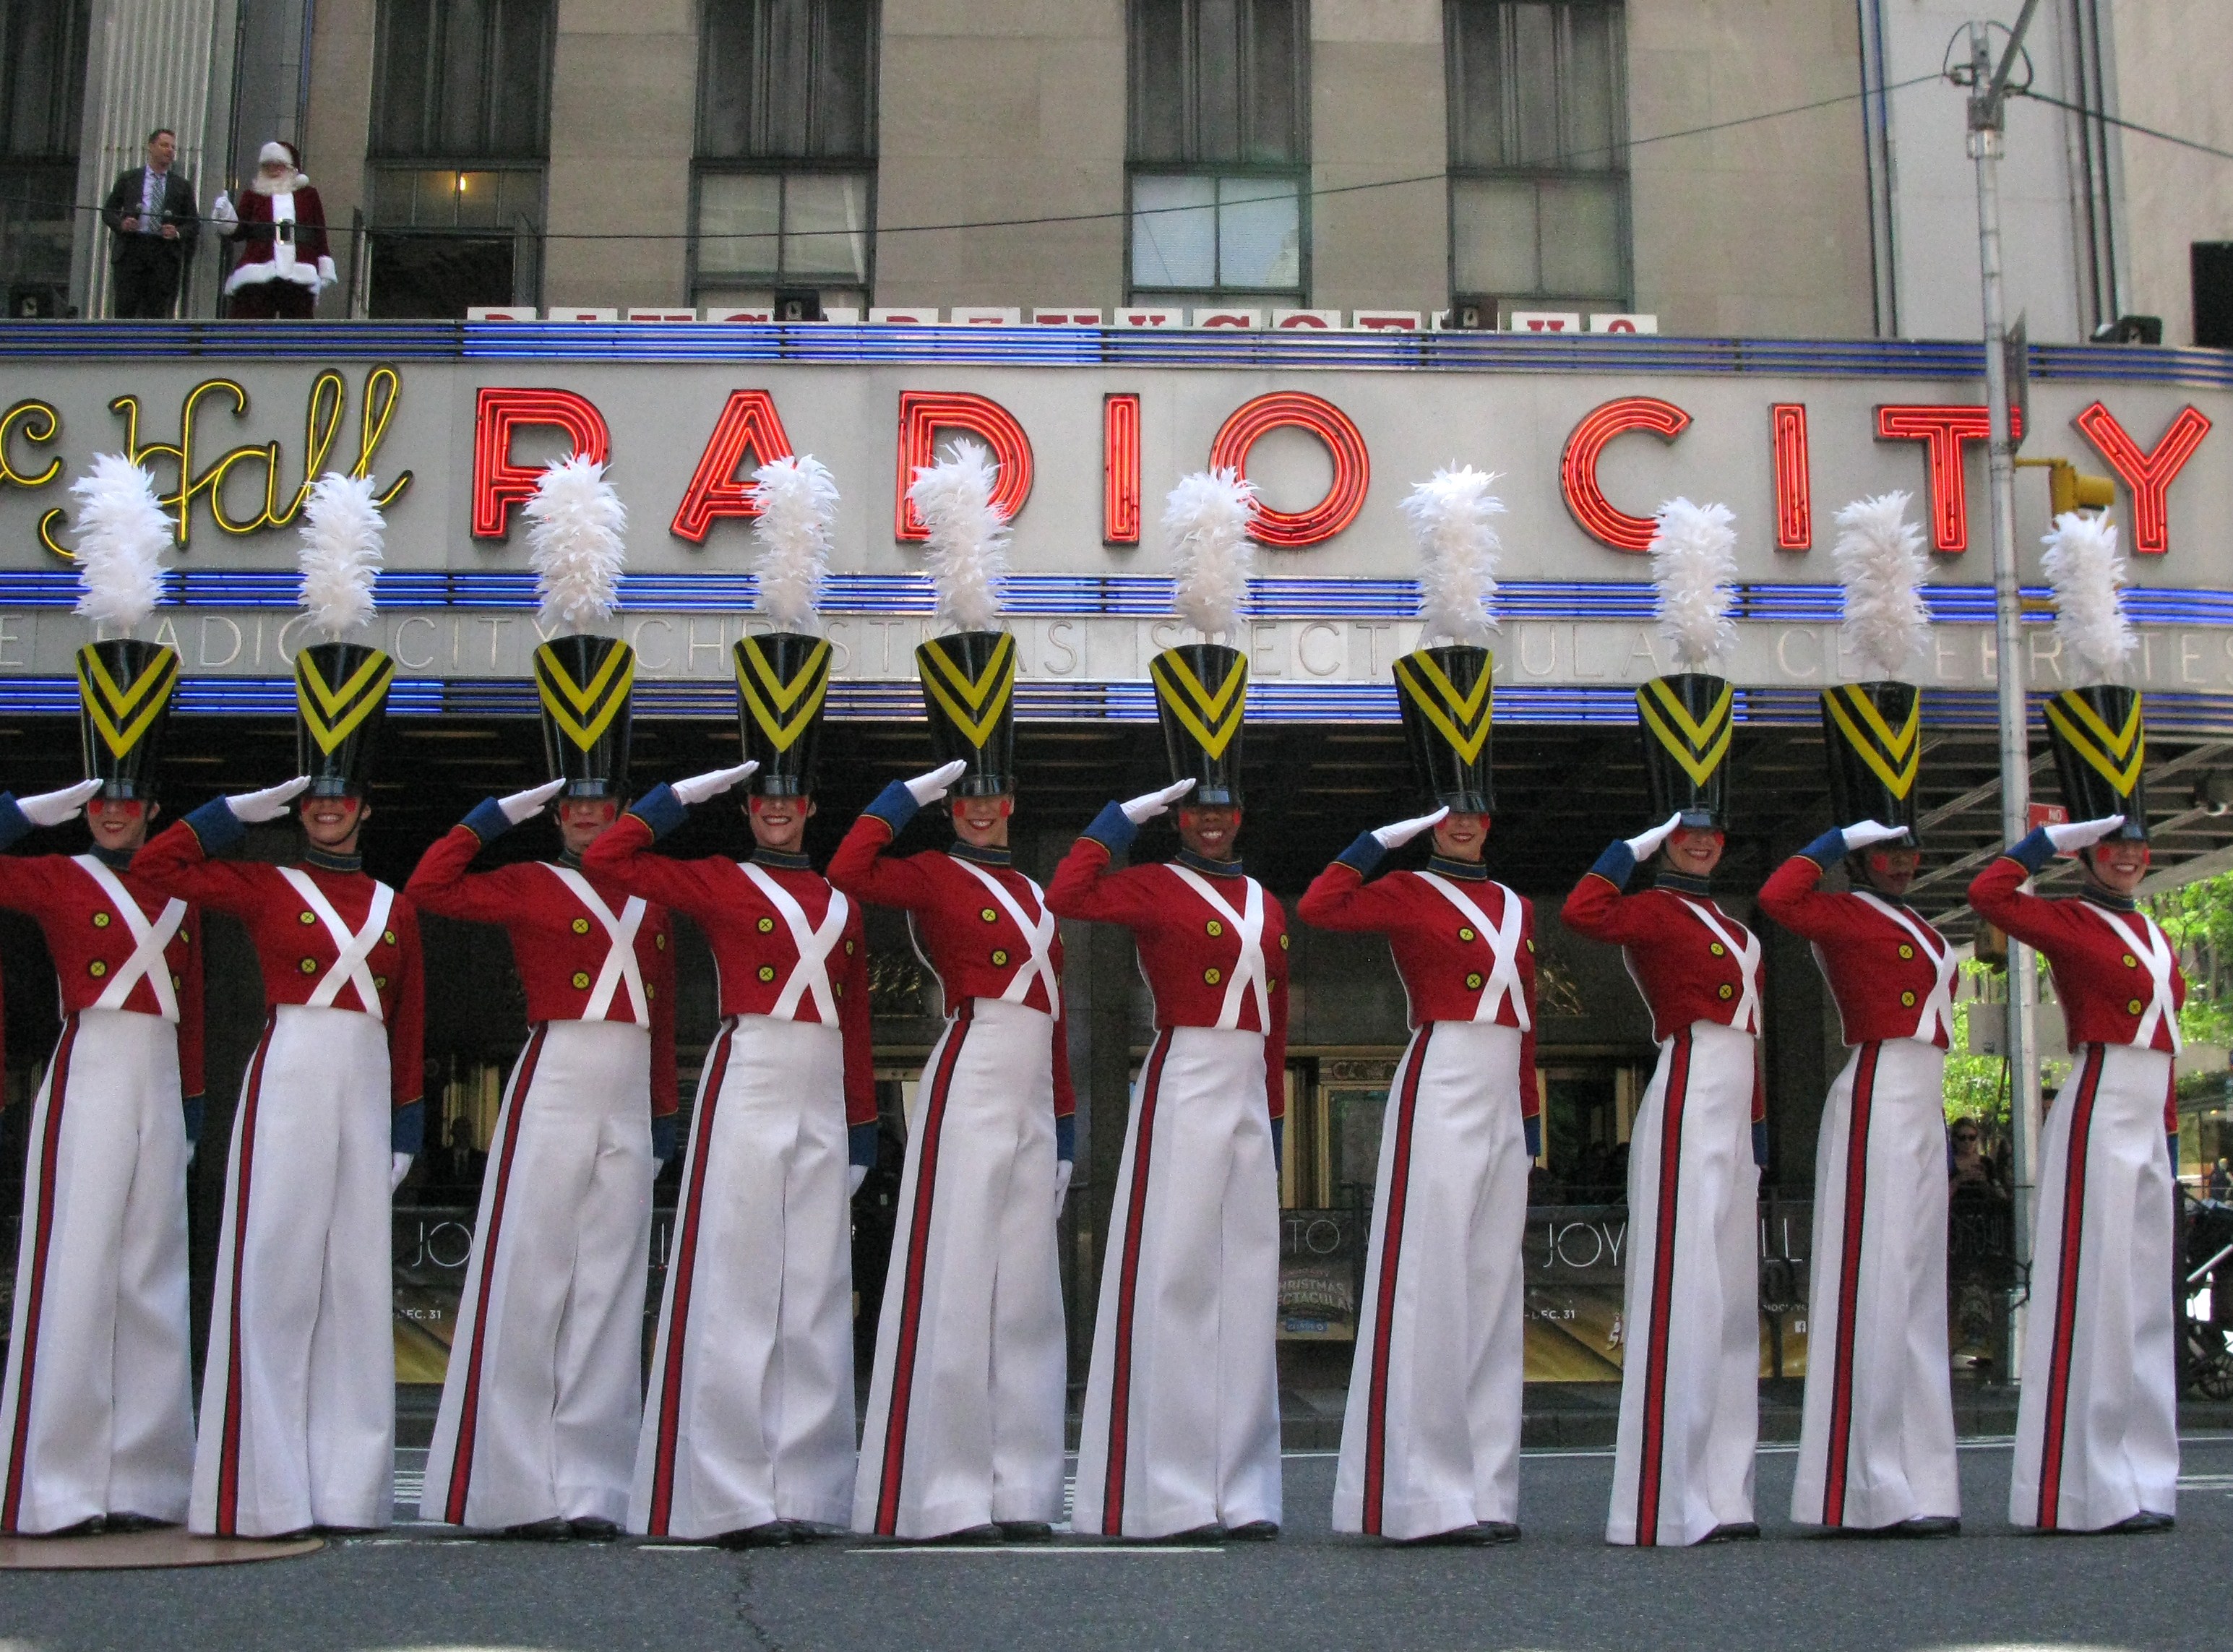 Santa Claus and the Radio City Rockettes perform on 6th Ave. August 14, 2014. (credit: AFP PHOTO/Don Emmert/Getty Images)